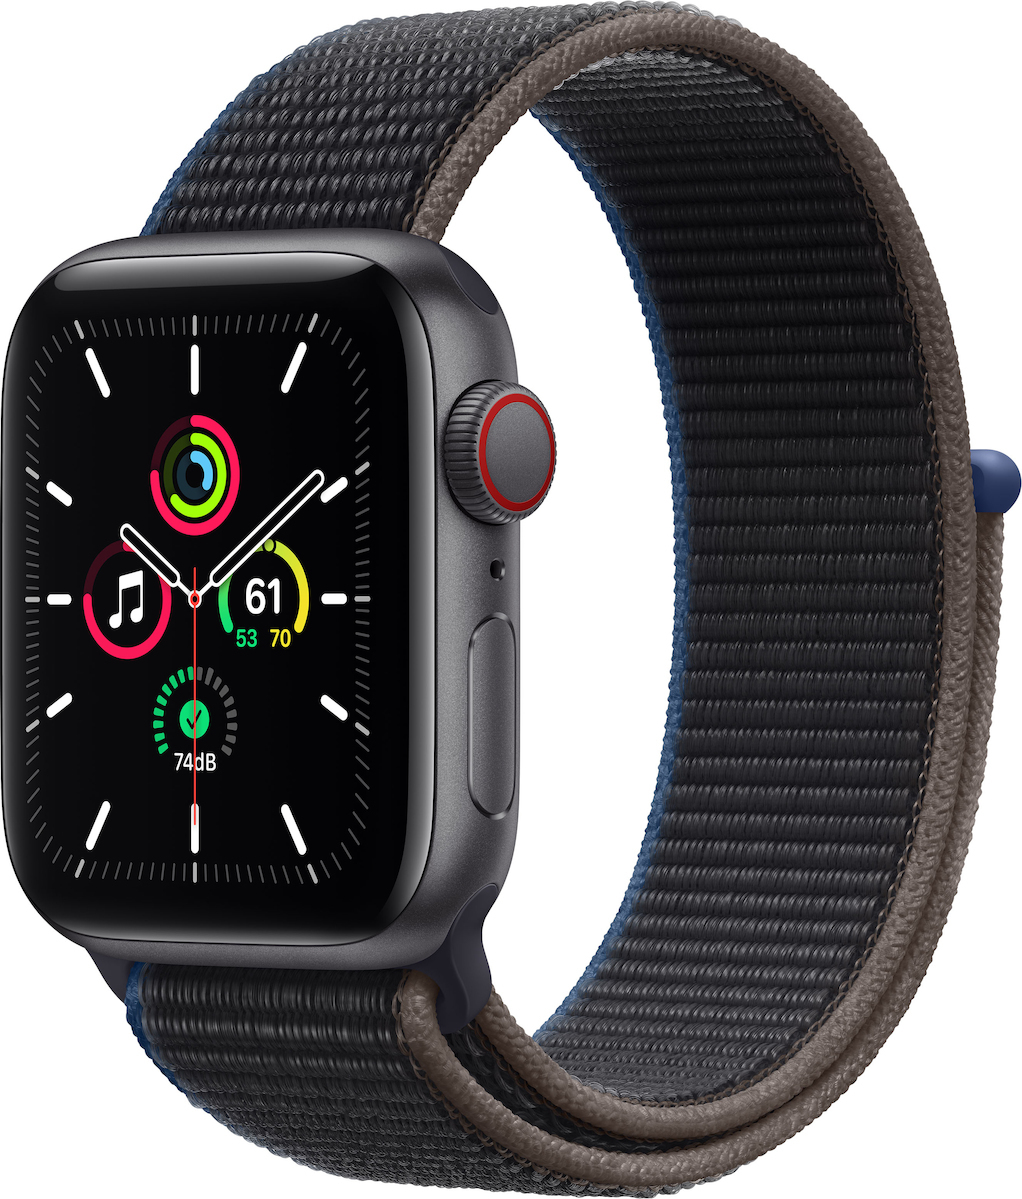 Apple Watch SE Cellular 40mm (Space Gray & Charcoal Sport Loop